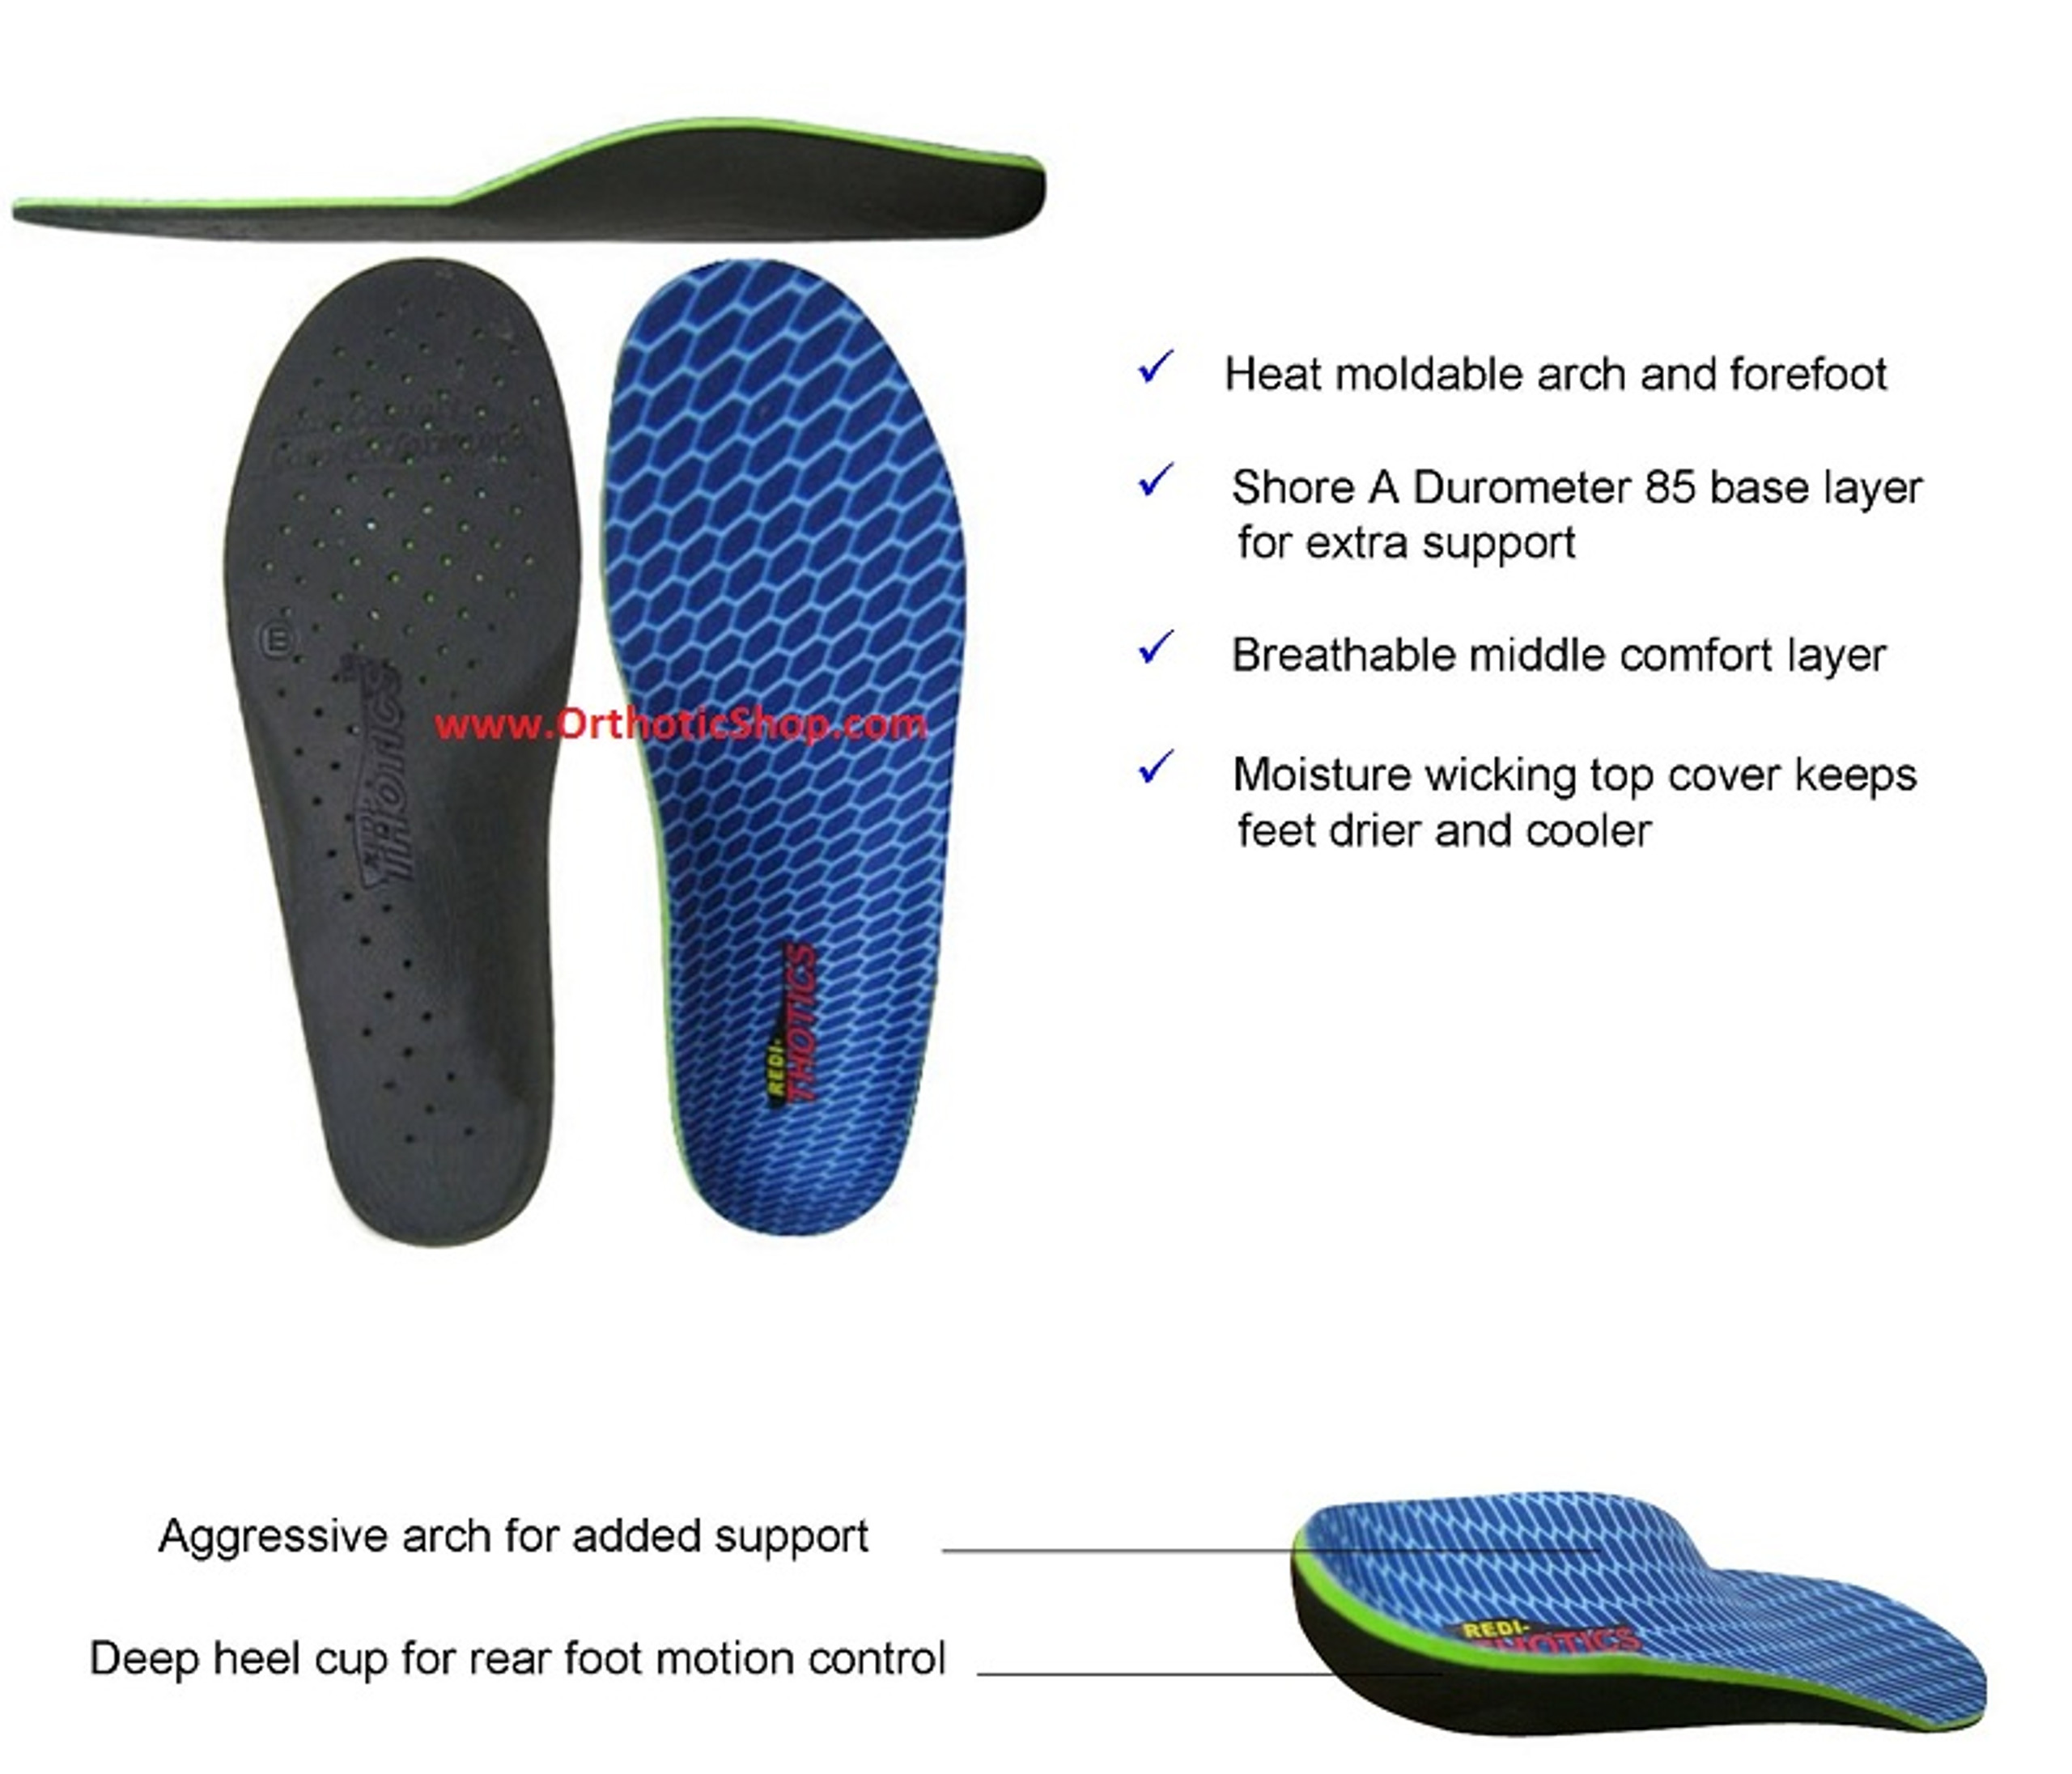 Redi-Thotics Heat Moldable Arch Supports - Orthotic Shop